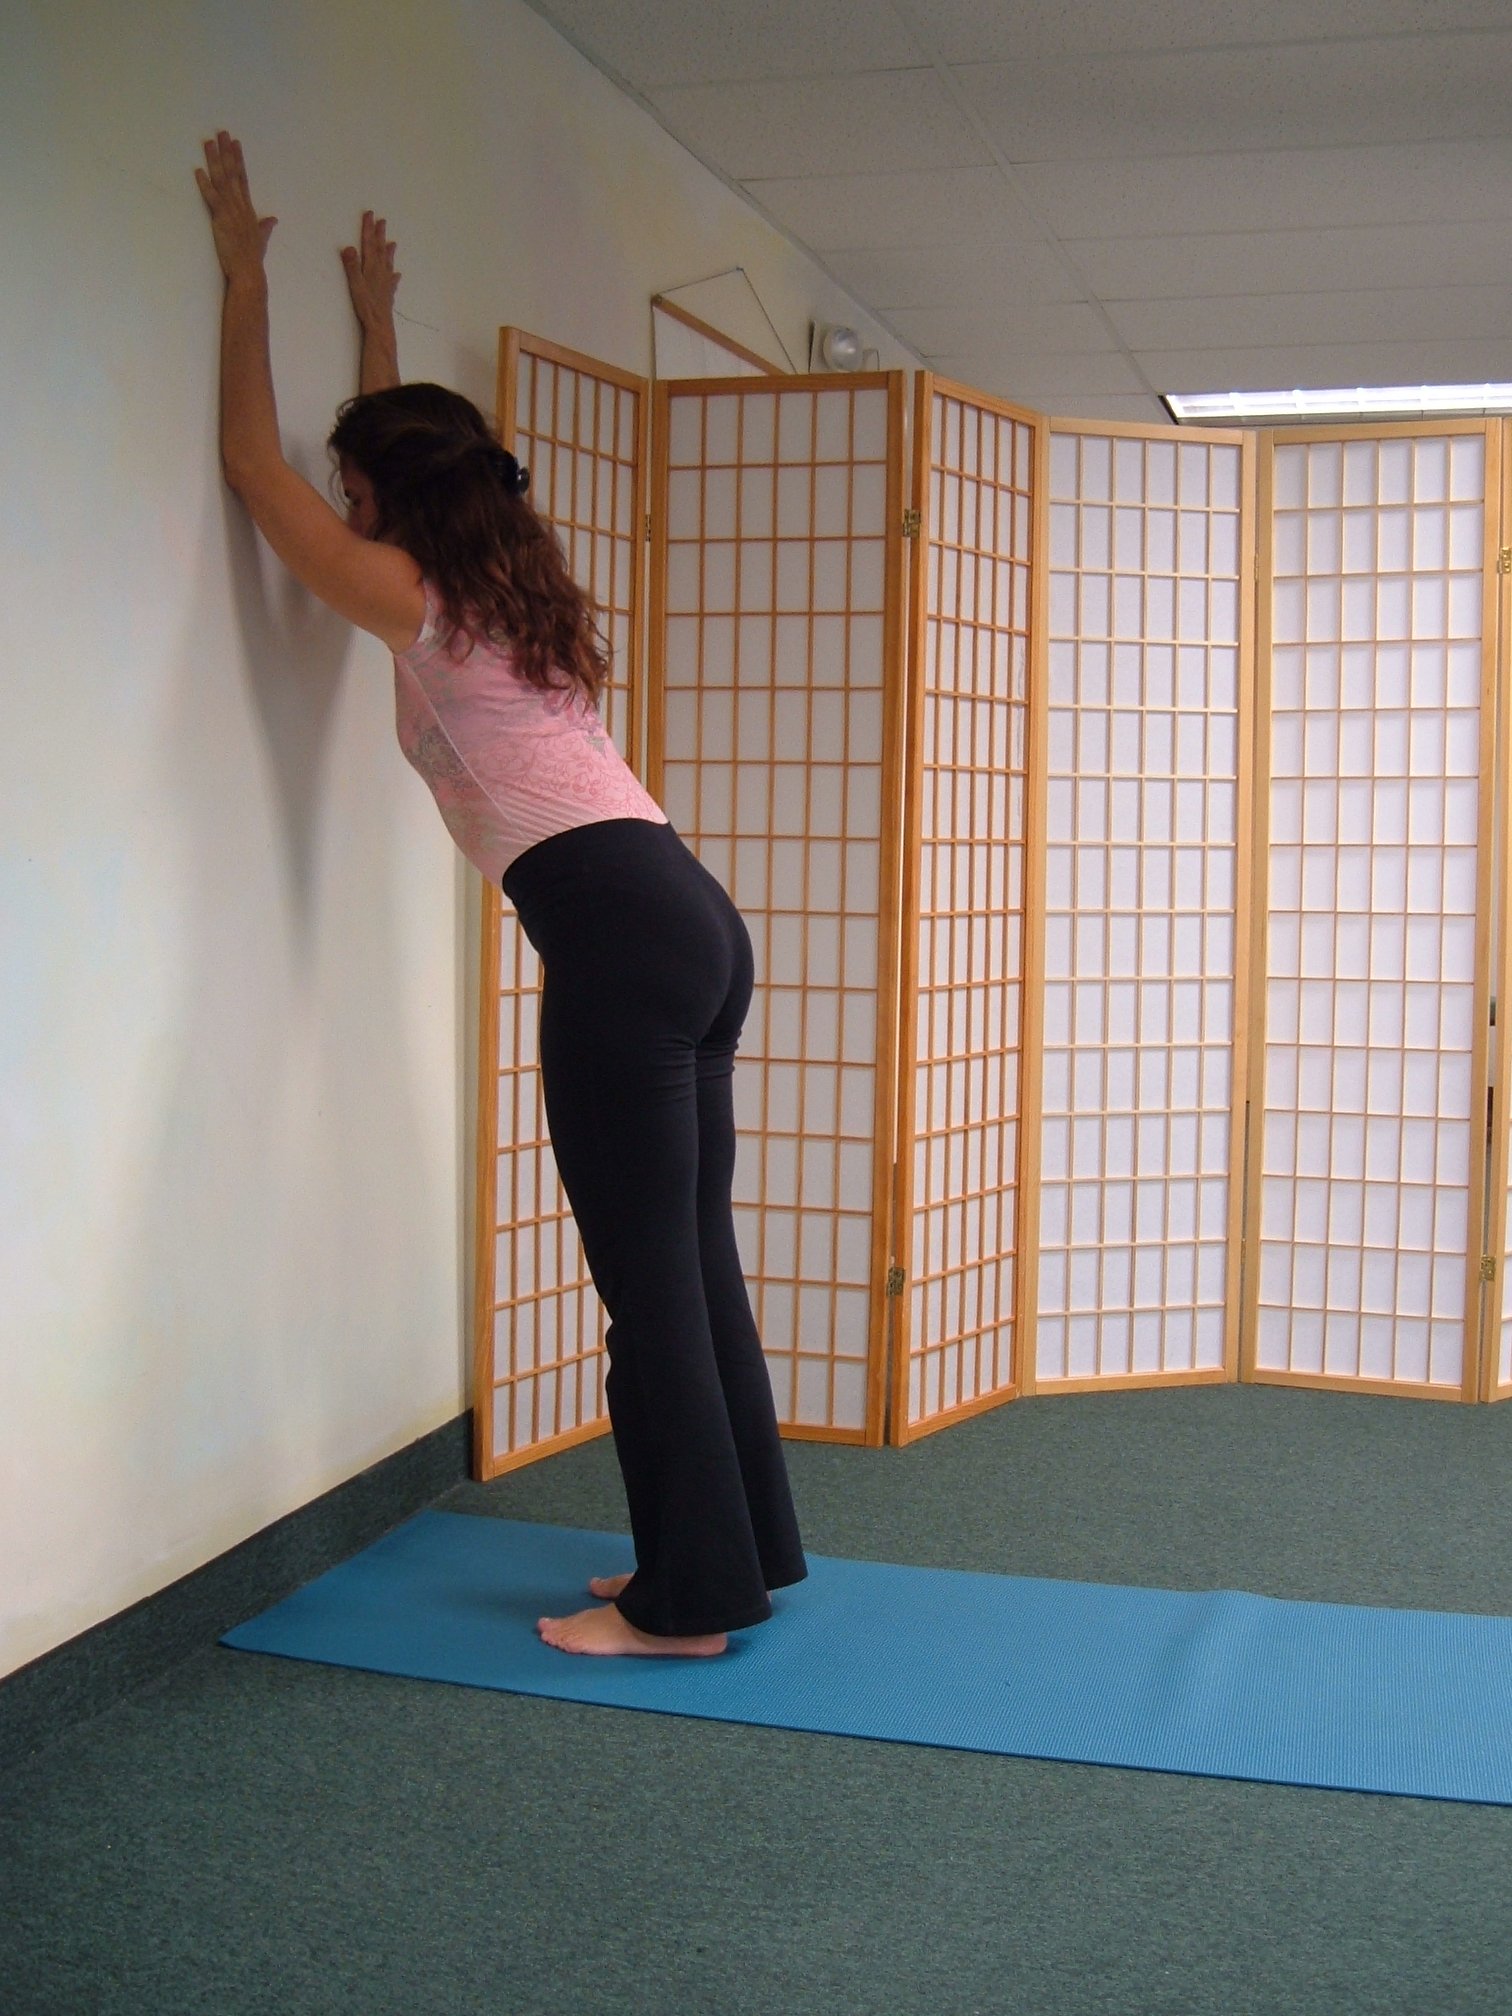 Practicing yoga at the wall helps support a yoga pose